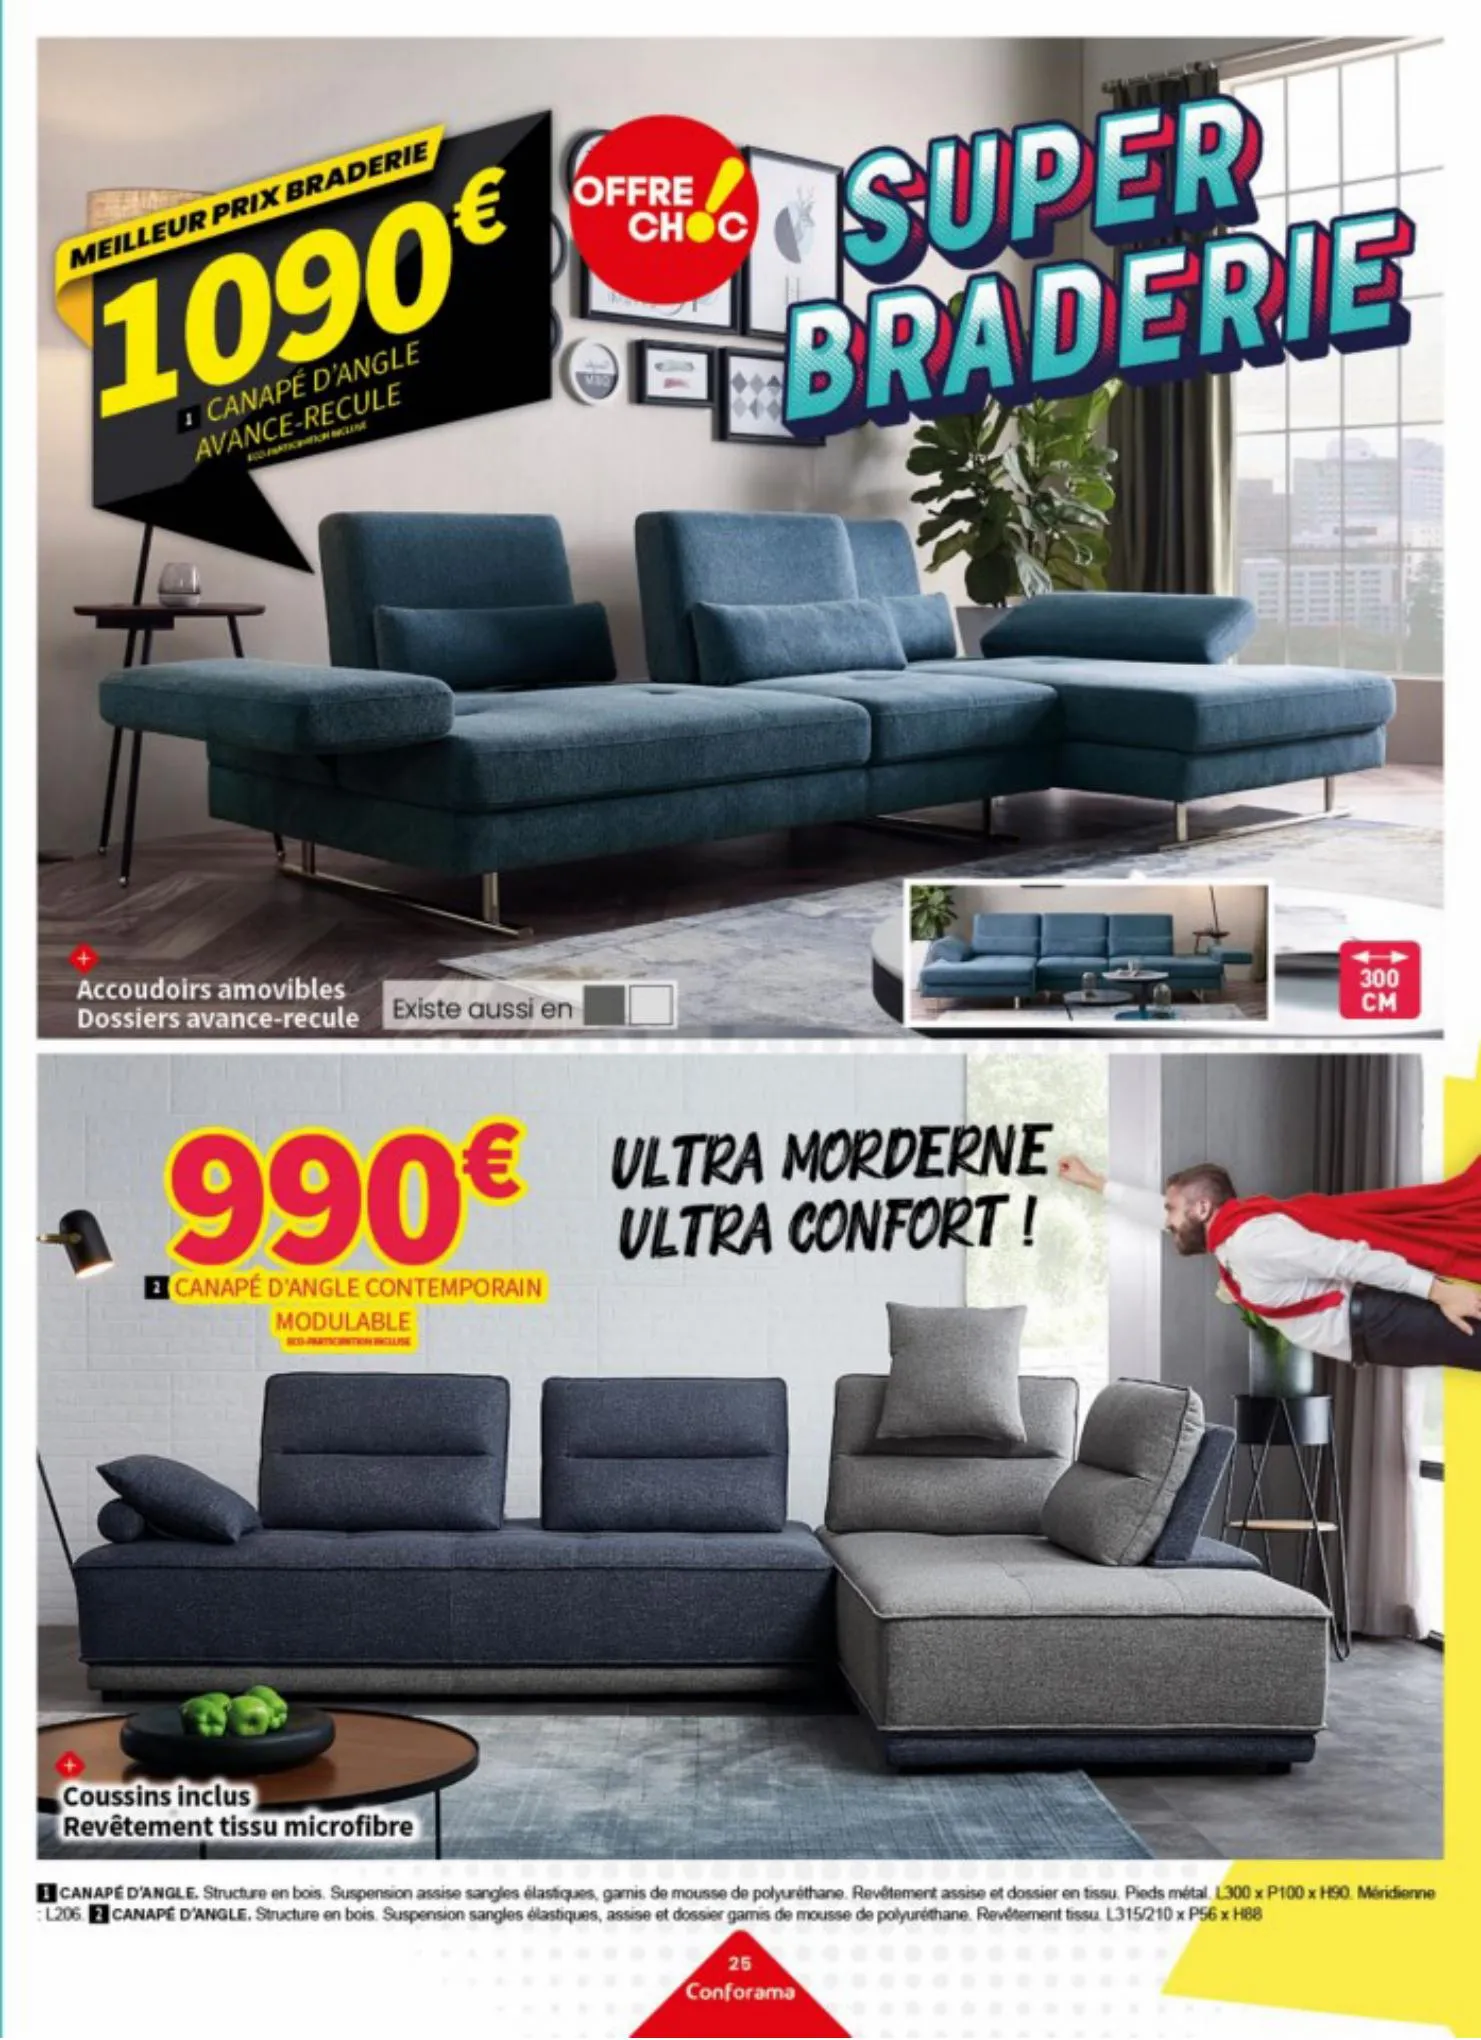 Catalogue Super braderie, page 00025